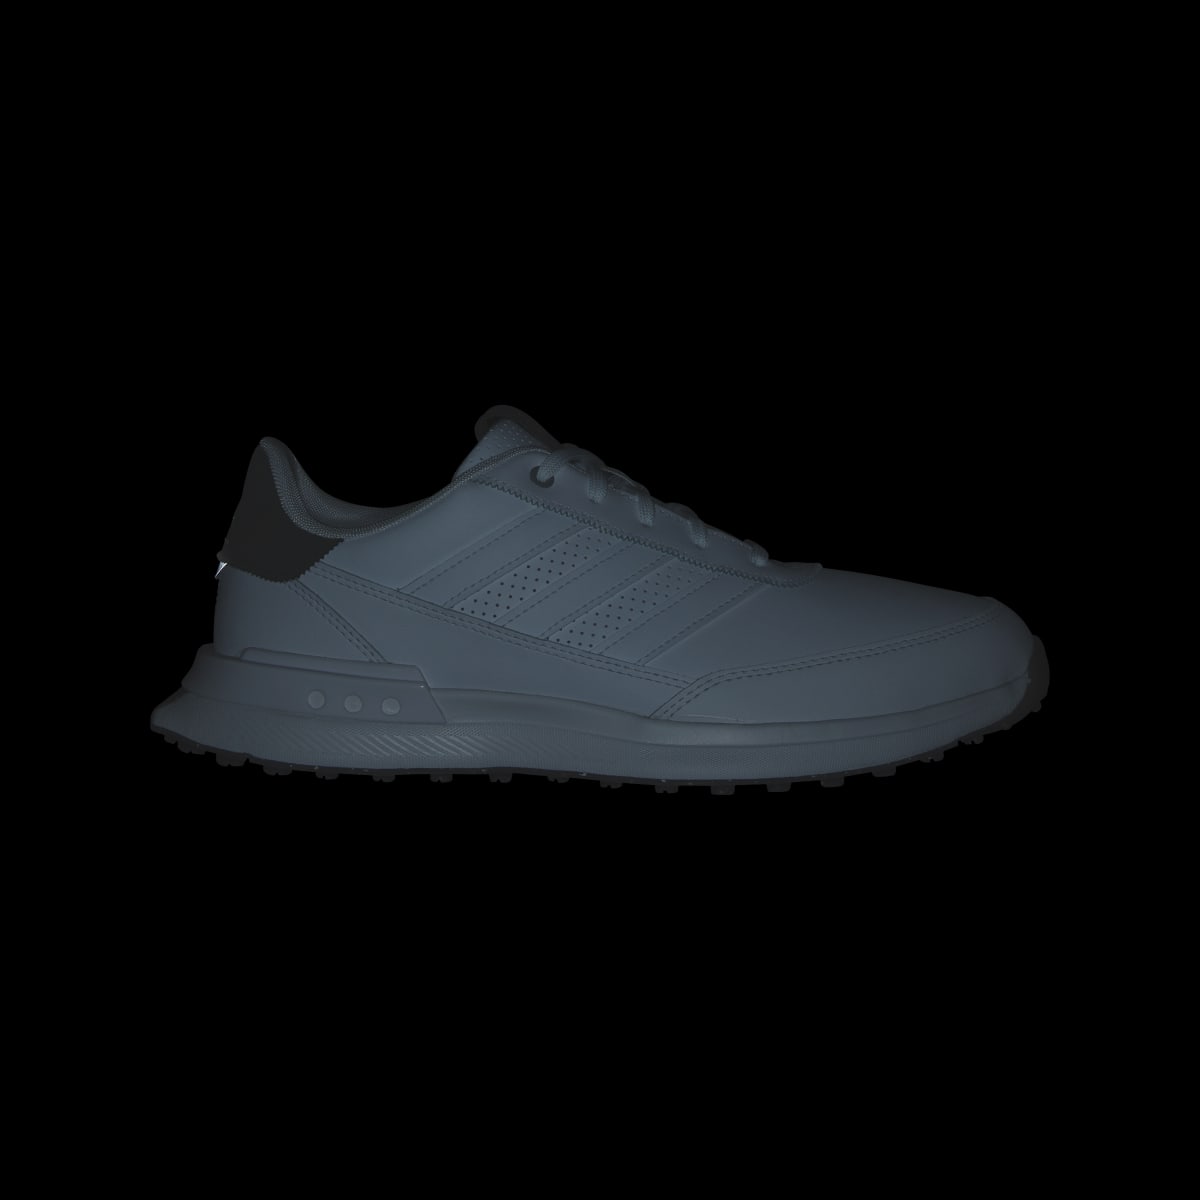 Adidas S2G 24 Leather Spikeless Golf Shoes. 5